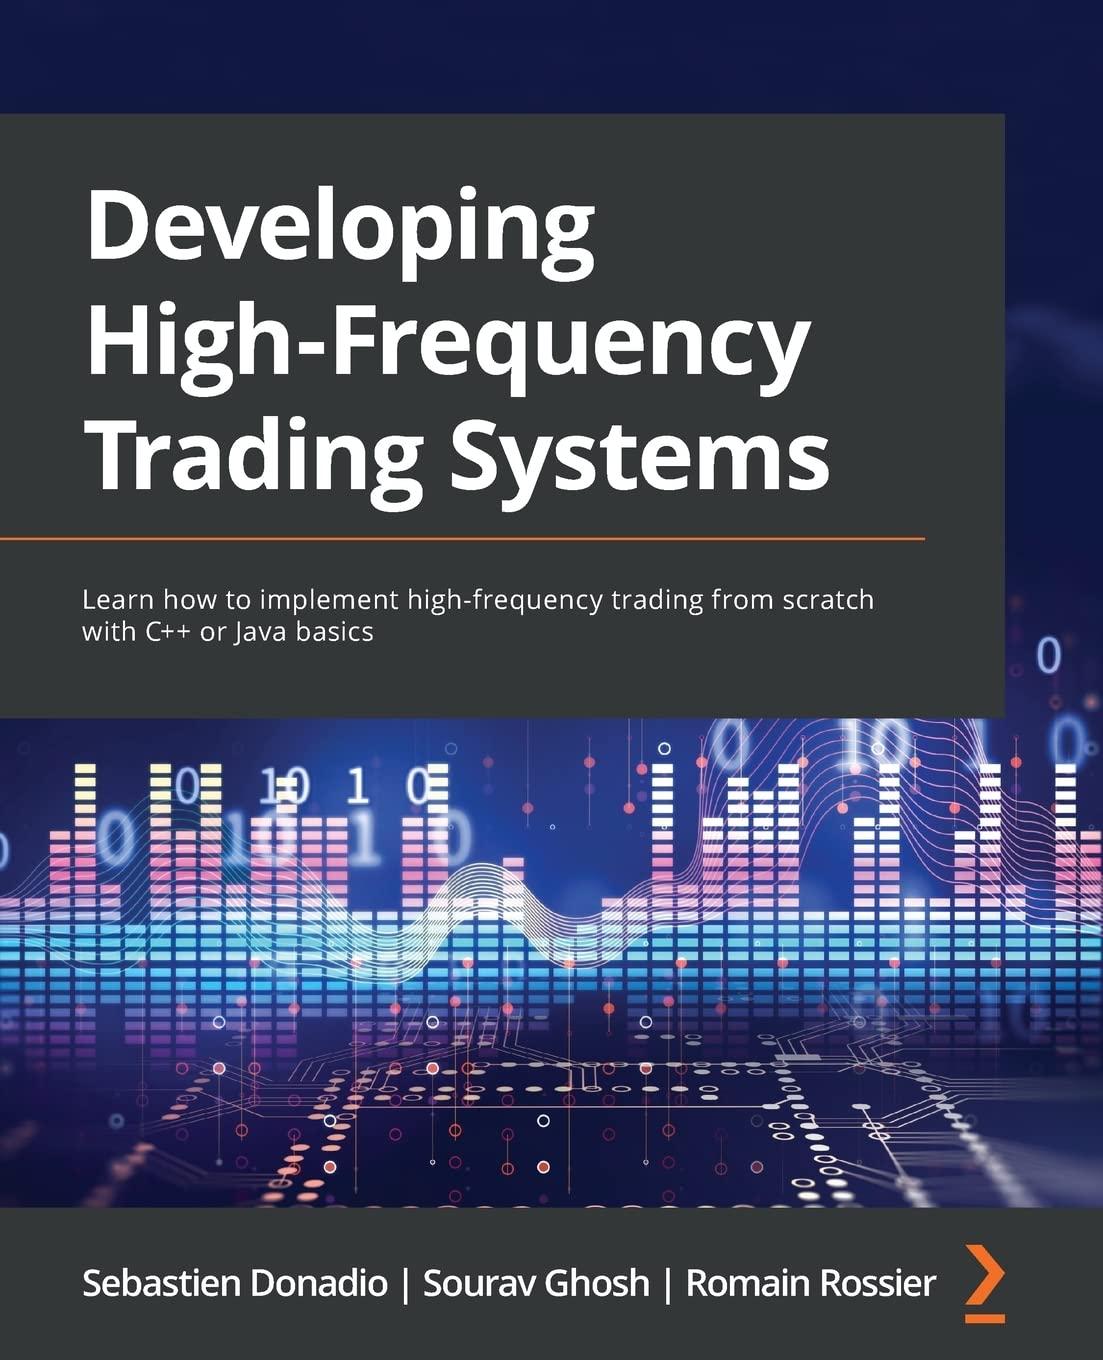 Developing High Frequency Trading Systems Learn How To Implement High Frequency Trading From Scratch With C++ Or Java Basics